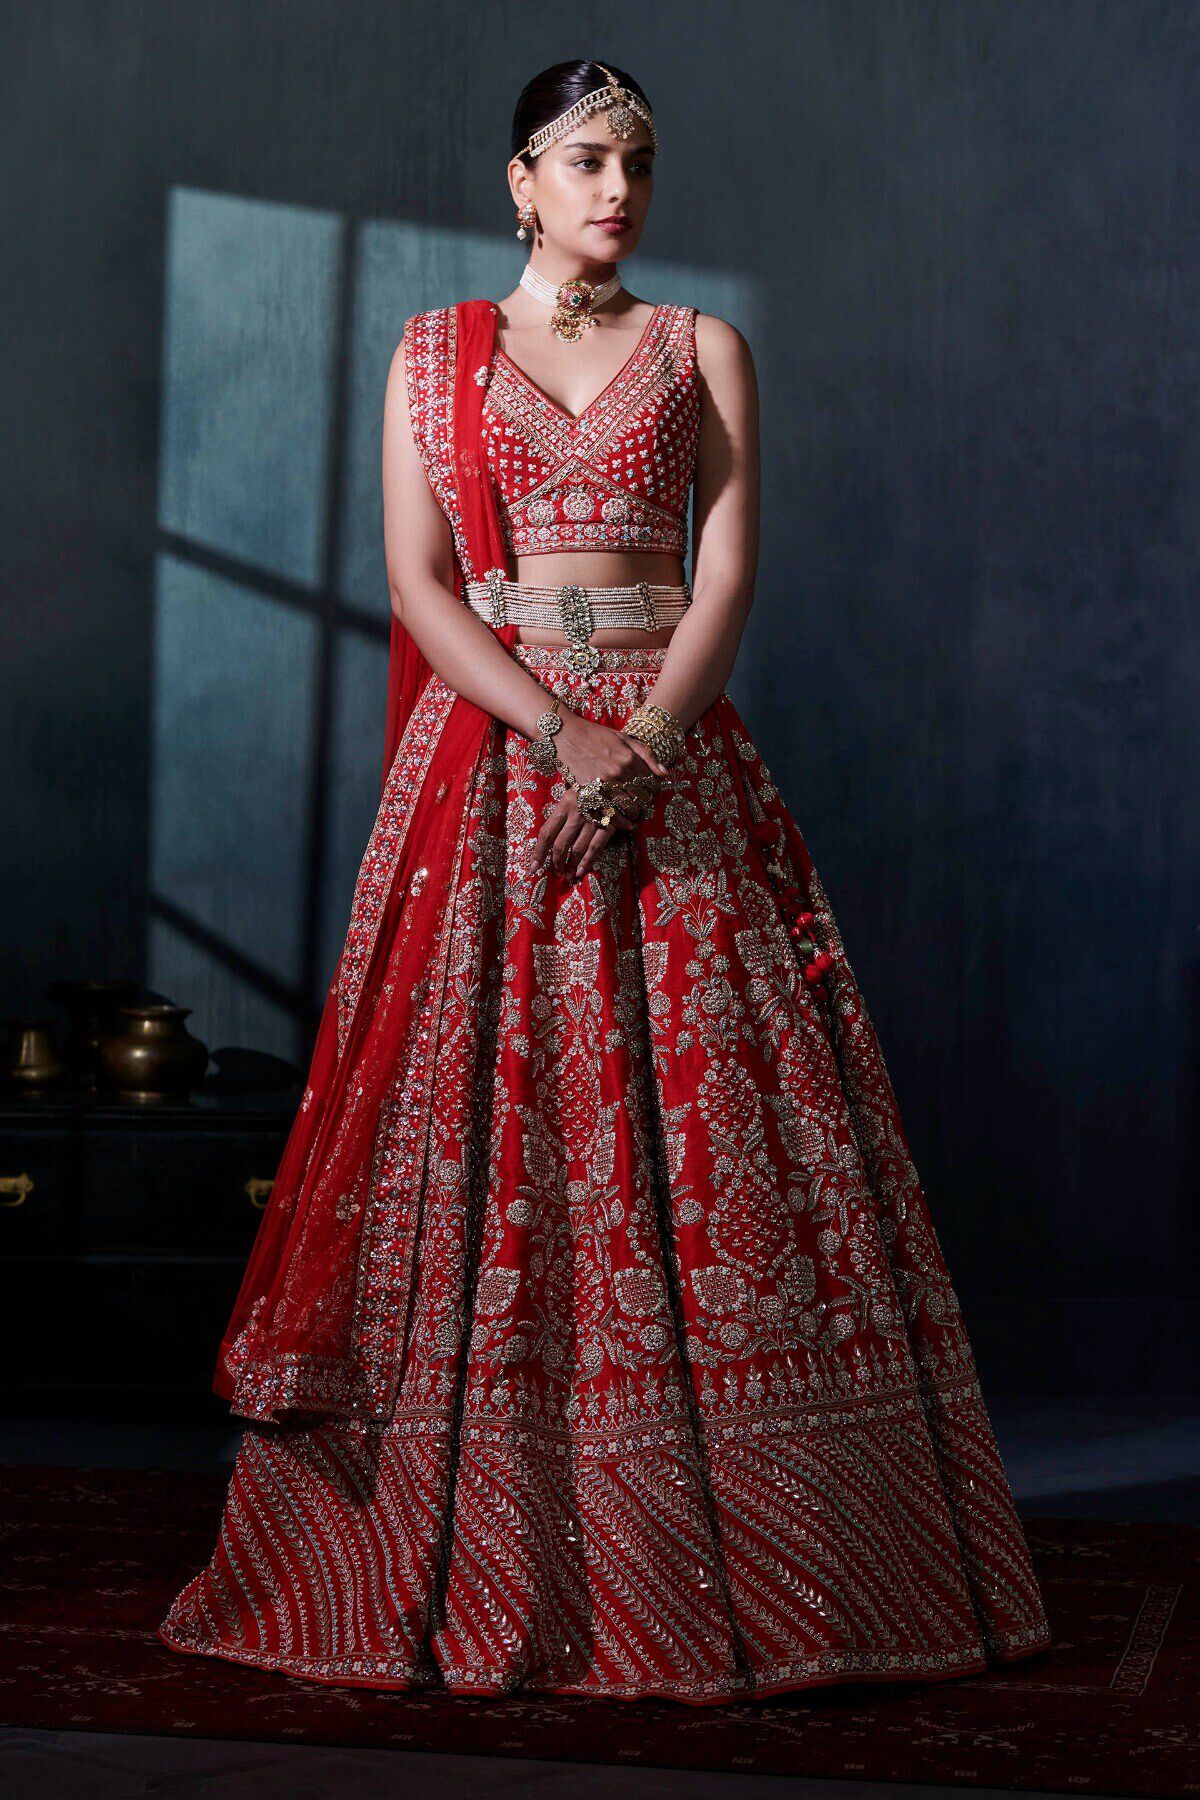 A Beautiful Day Wedding With The Bride In A Ravishing Red Lehenga | Bridal  lehenga red, Indian bride outfits, Red lehenga